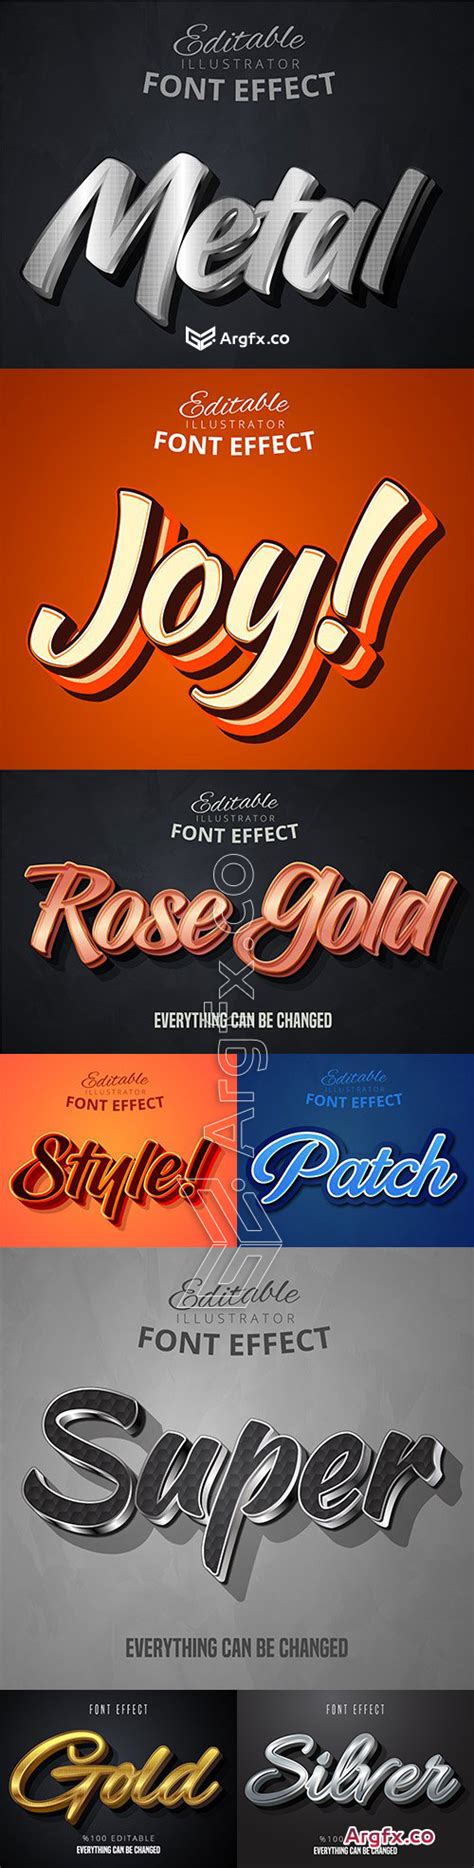 3d Font Effect Editable Text Collection Illustration 7 Free Download